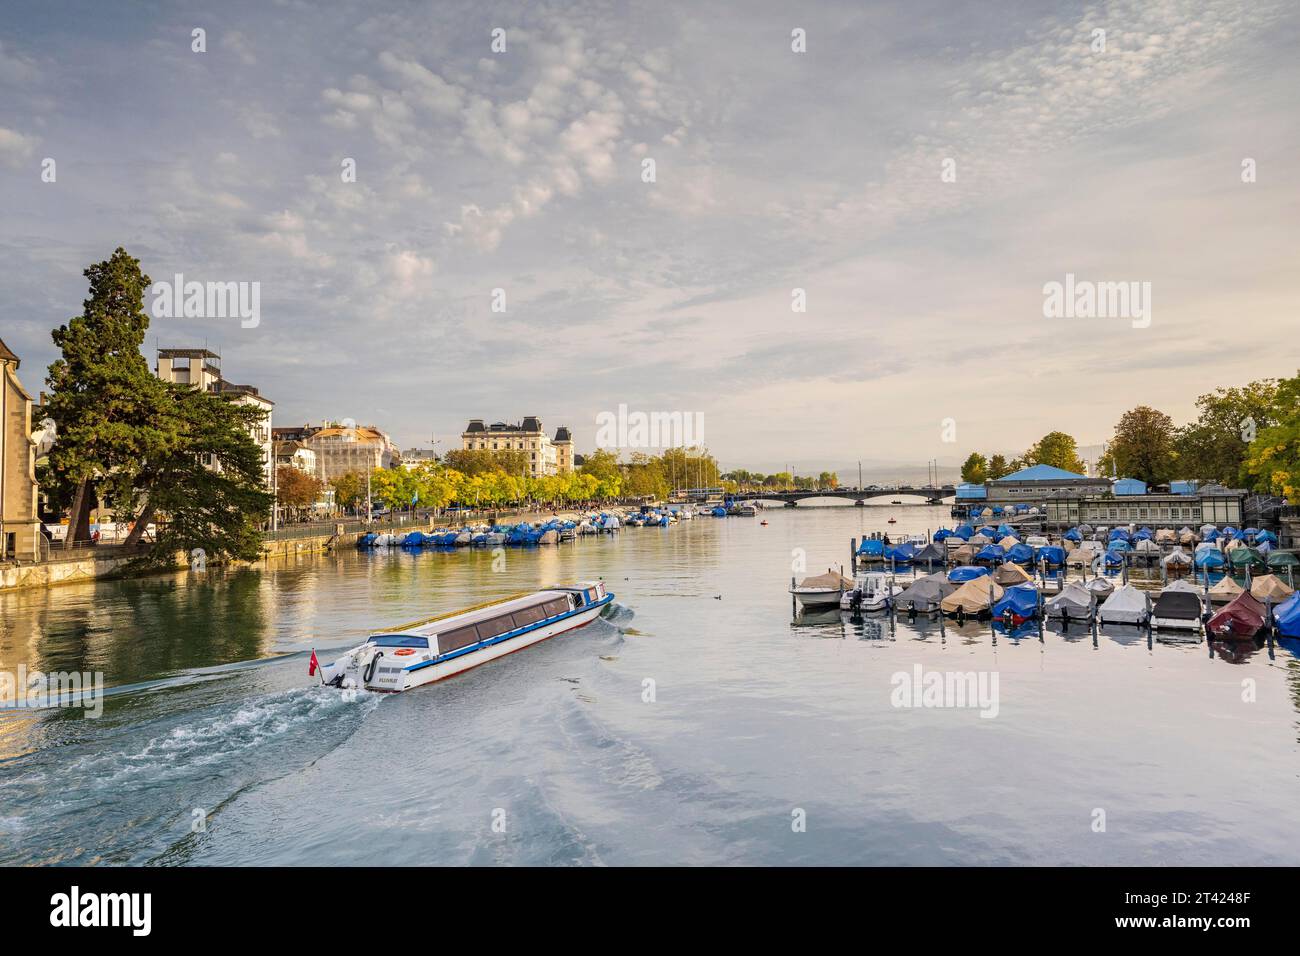 Old Town of Zurich with Quai Bridge and Boats, Limmat Boat, River Limmat, Canton Zurich, Switzerland Stock Photo